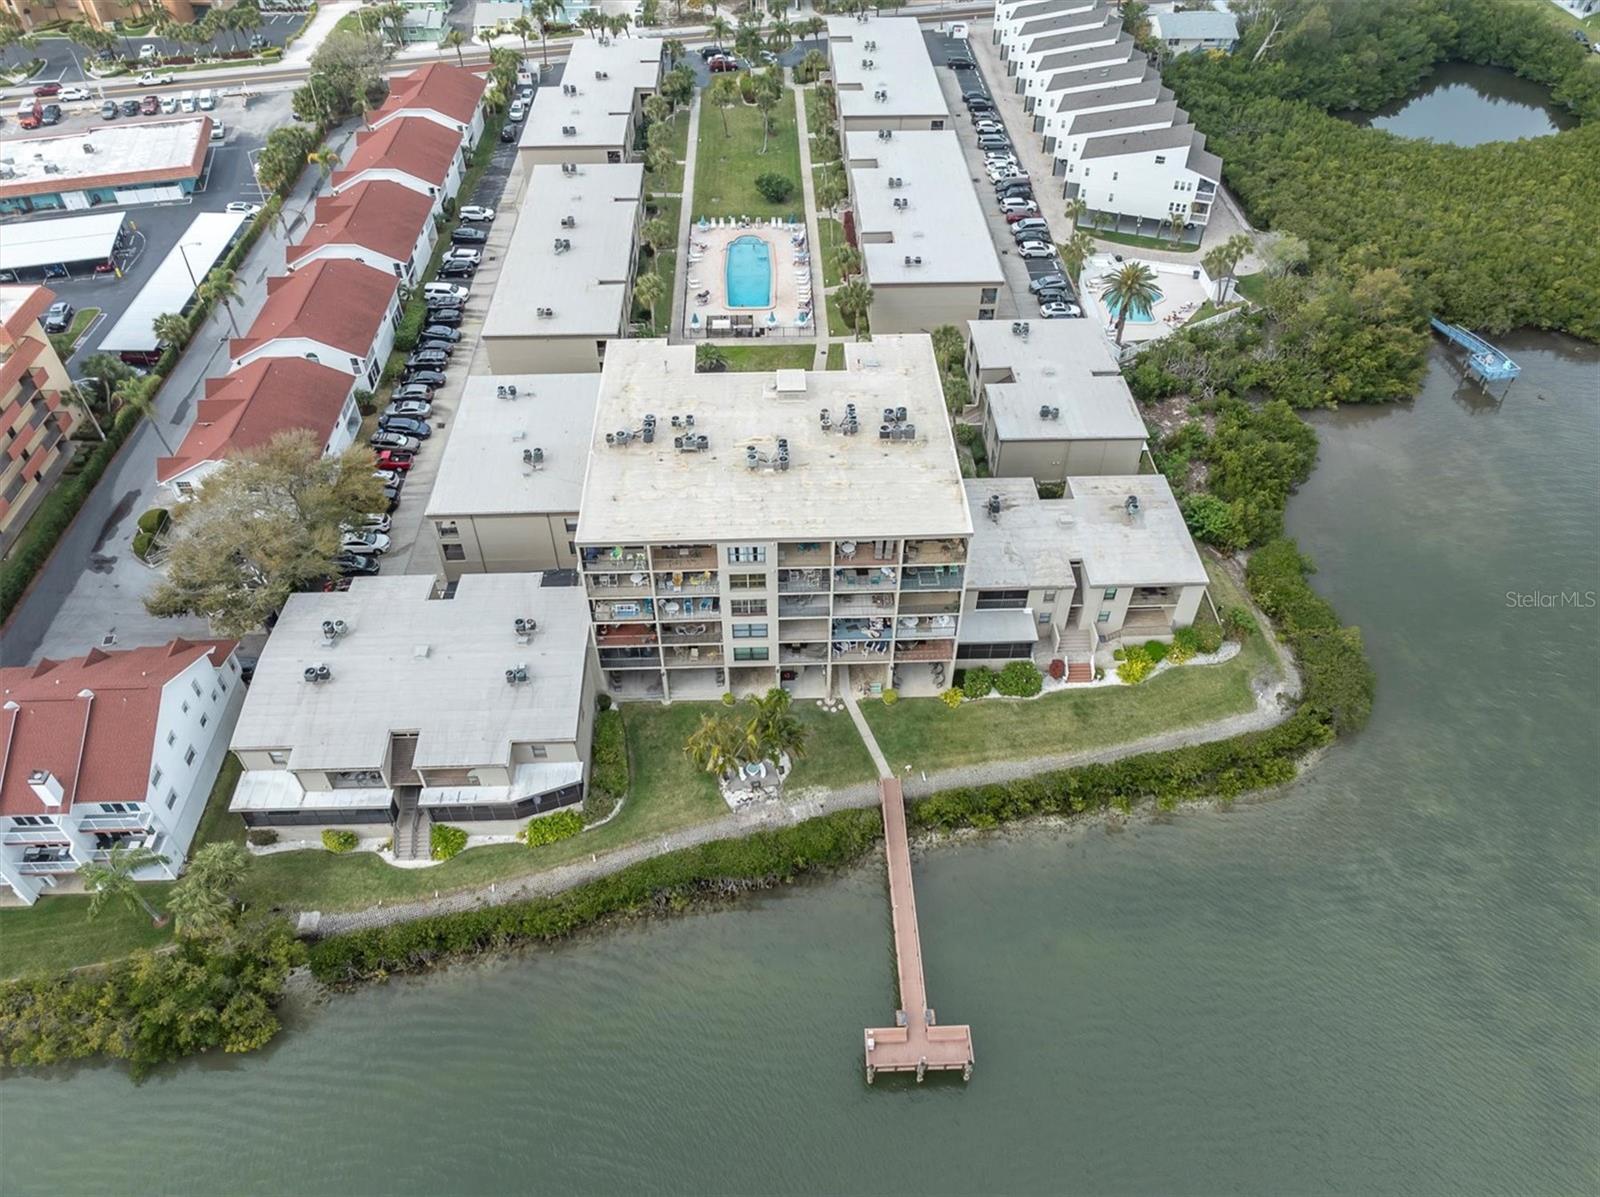 Aerial of Sea Club and Intracoastal Waterway